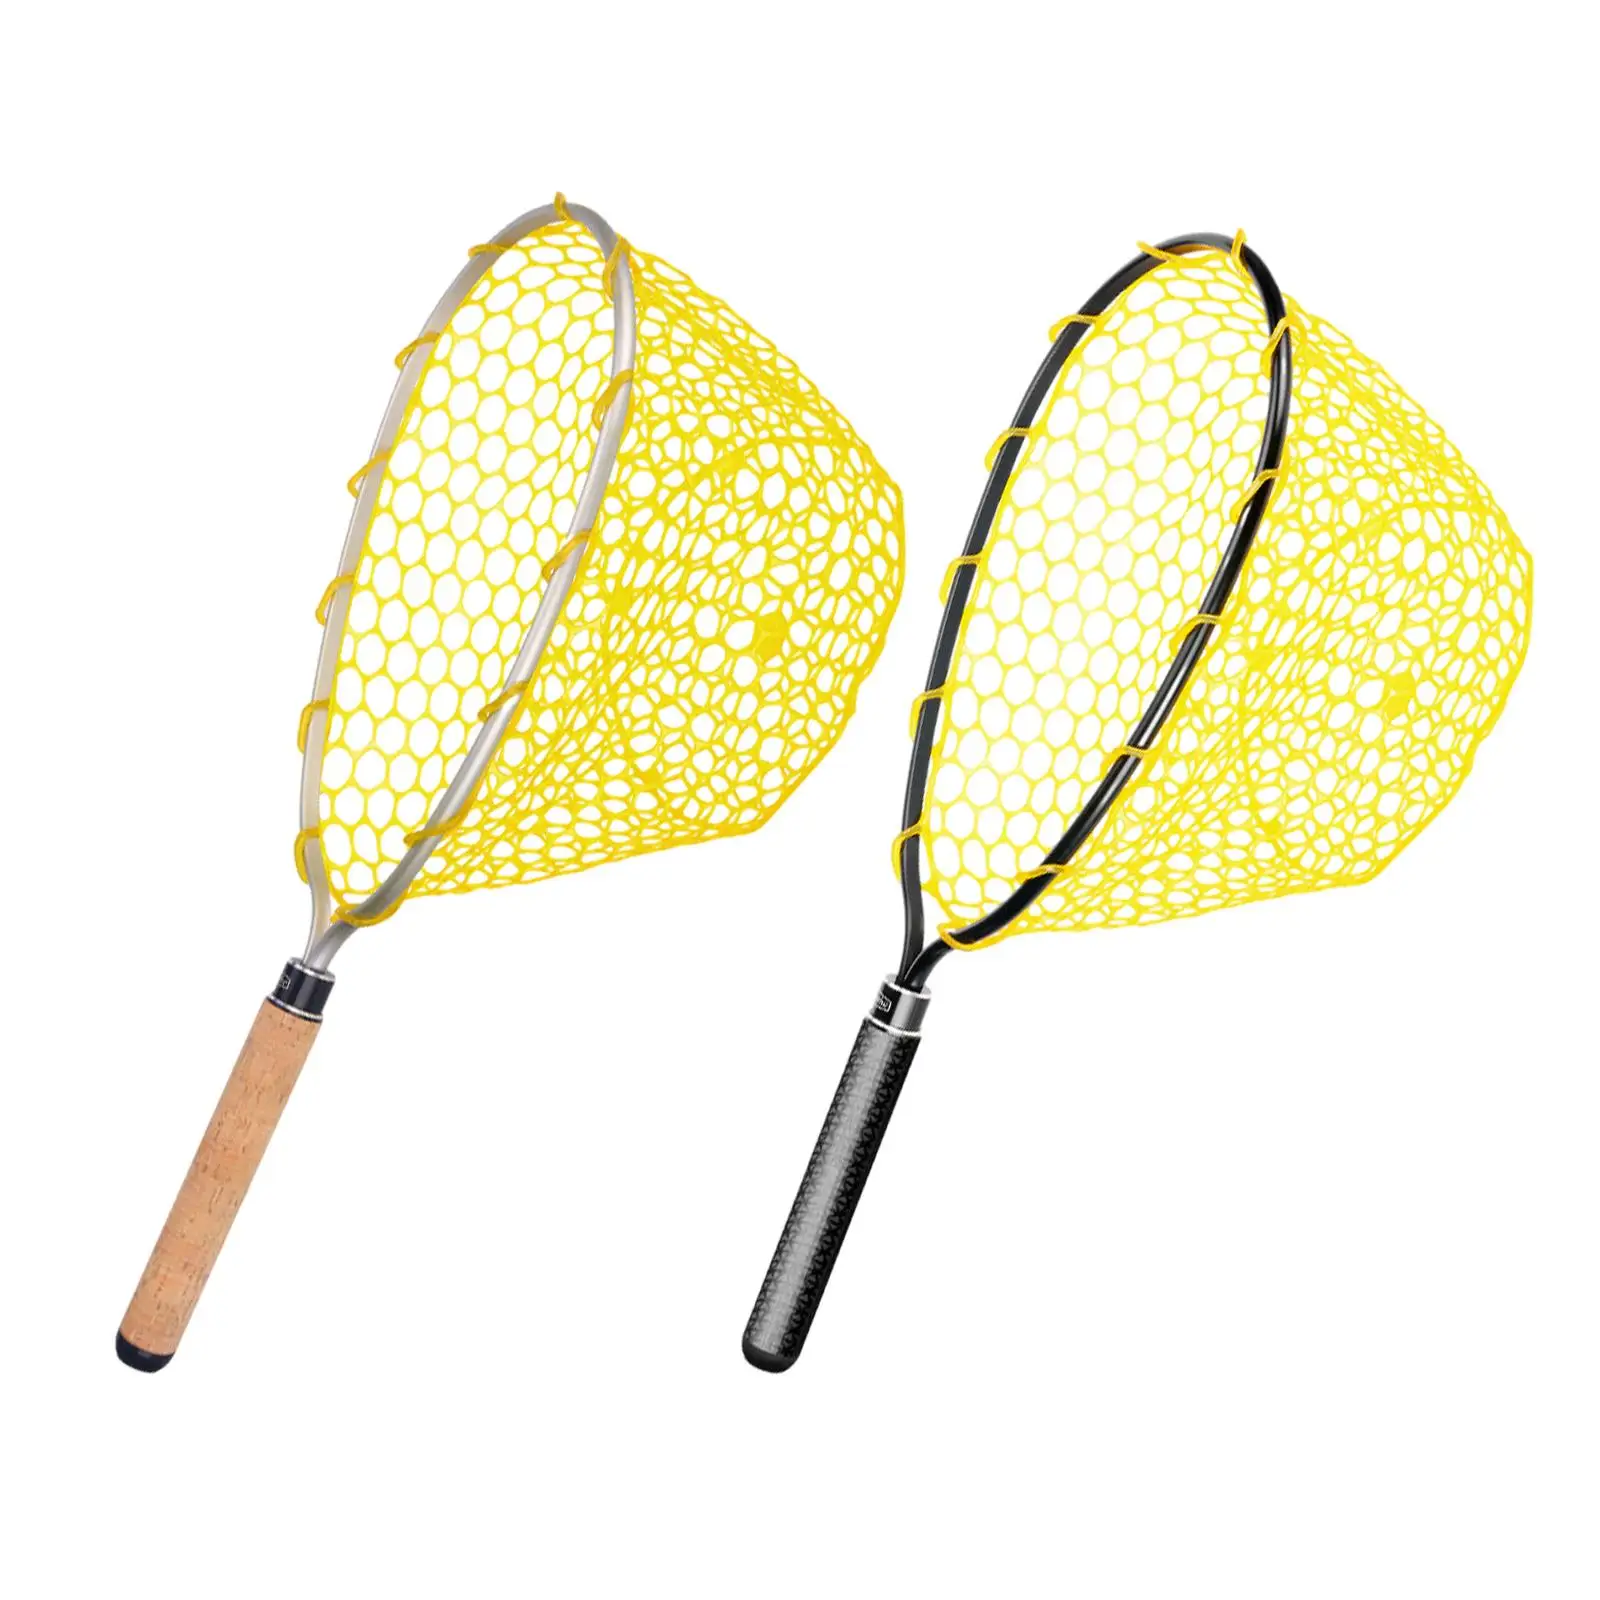 Fishing Landing Net Adult with Handle Fishing Mesh Net for Bass Trout Salmon